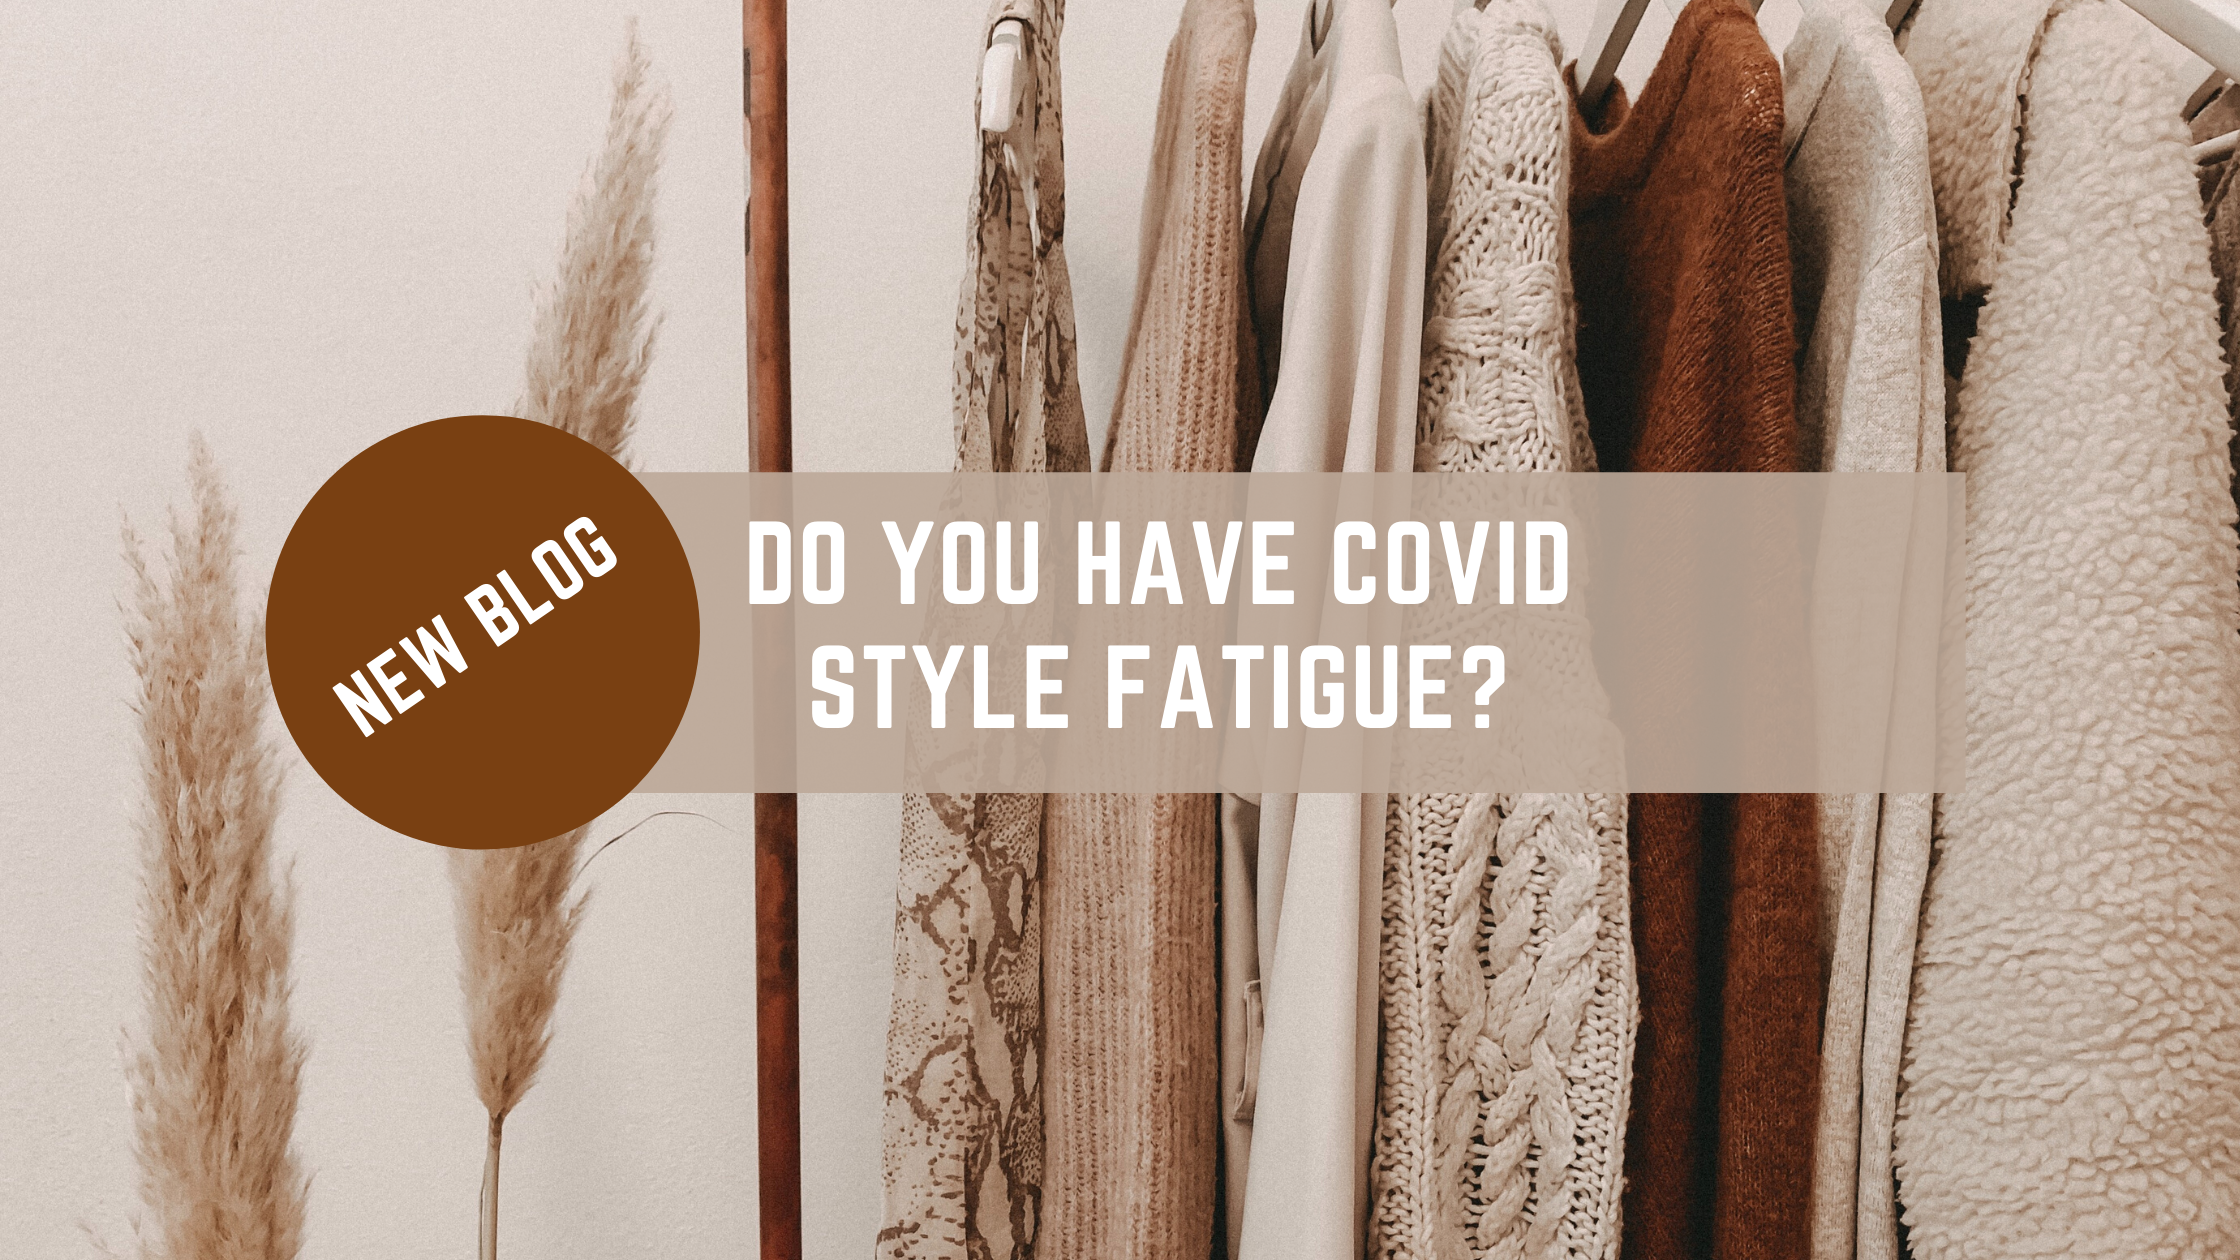 DO YOU HAVE COVID STYLE FATIGUE?